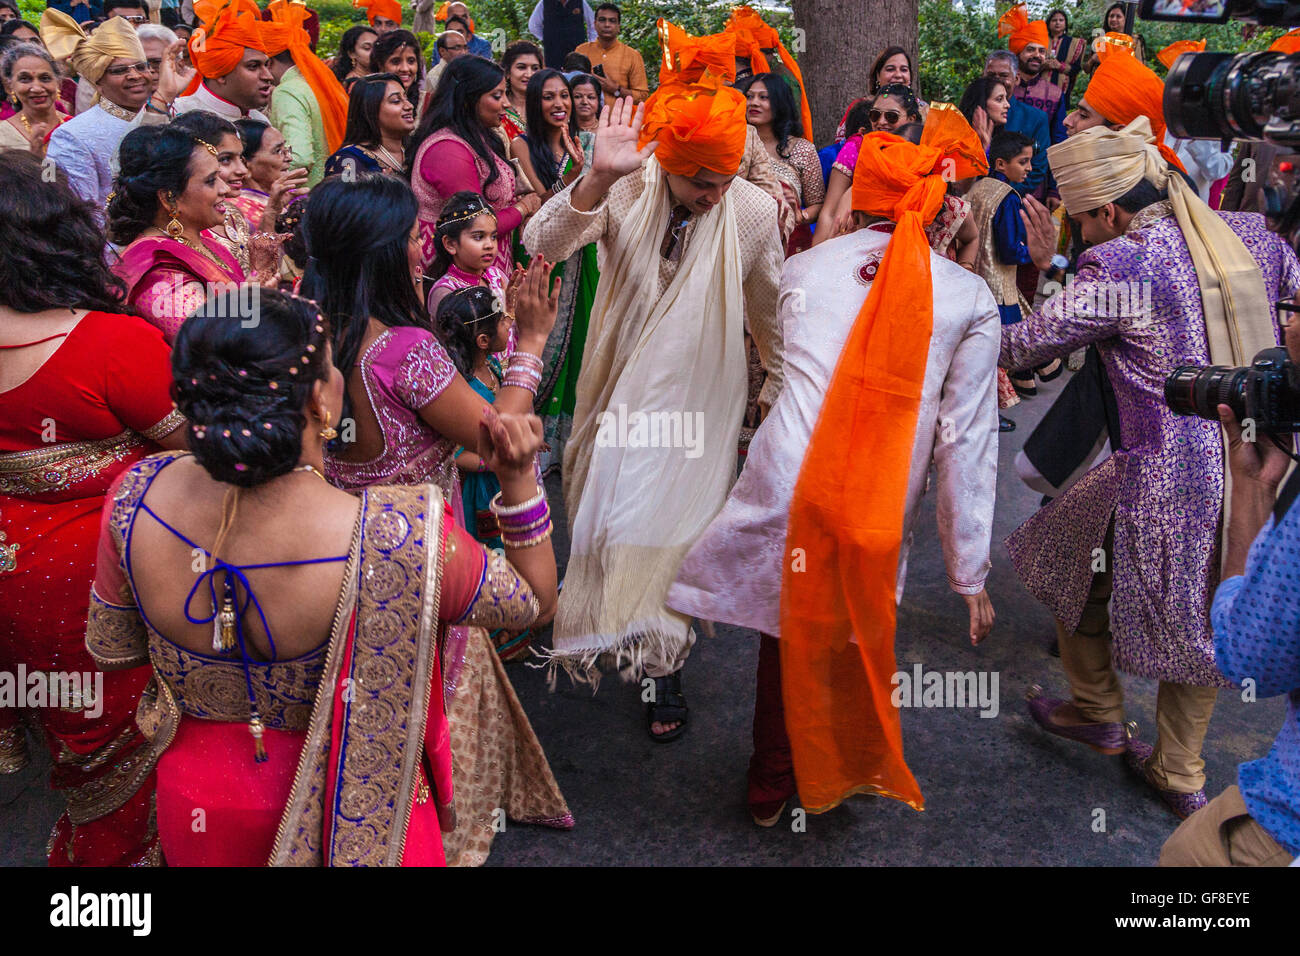 Indians dancing the Bhangra at a wedding reception in Rajasthan Stock Photo